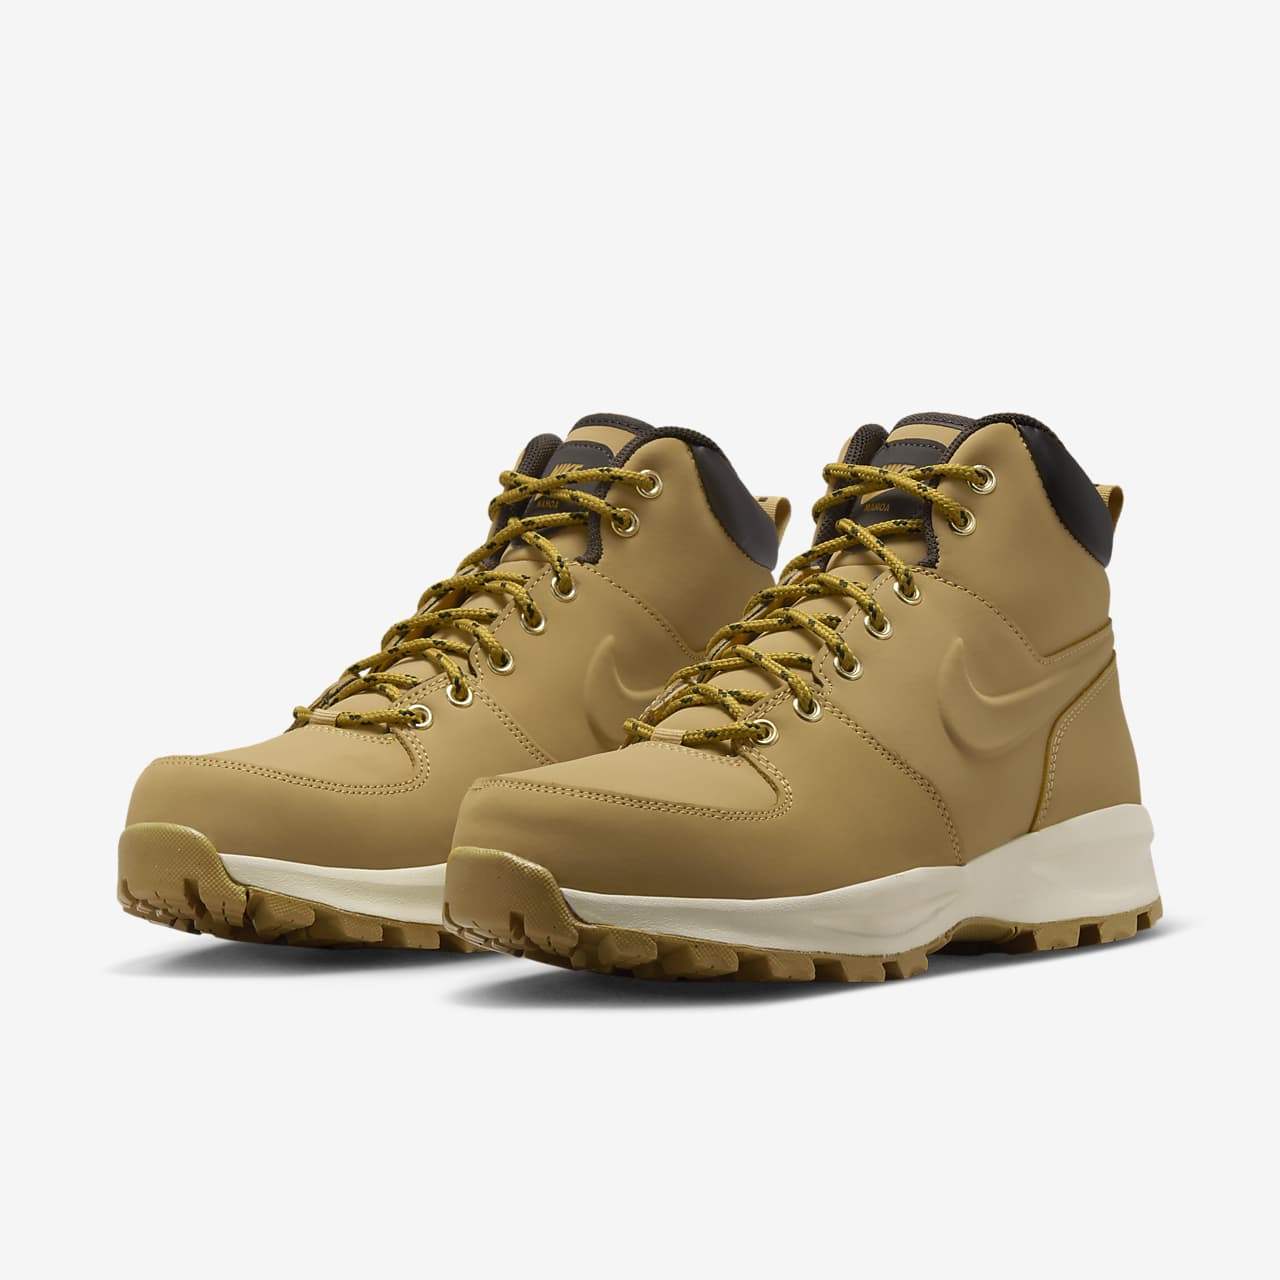 nike manoa boots outfit